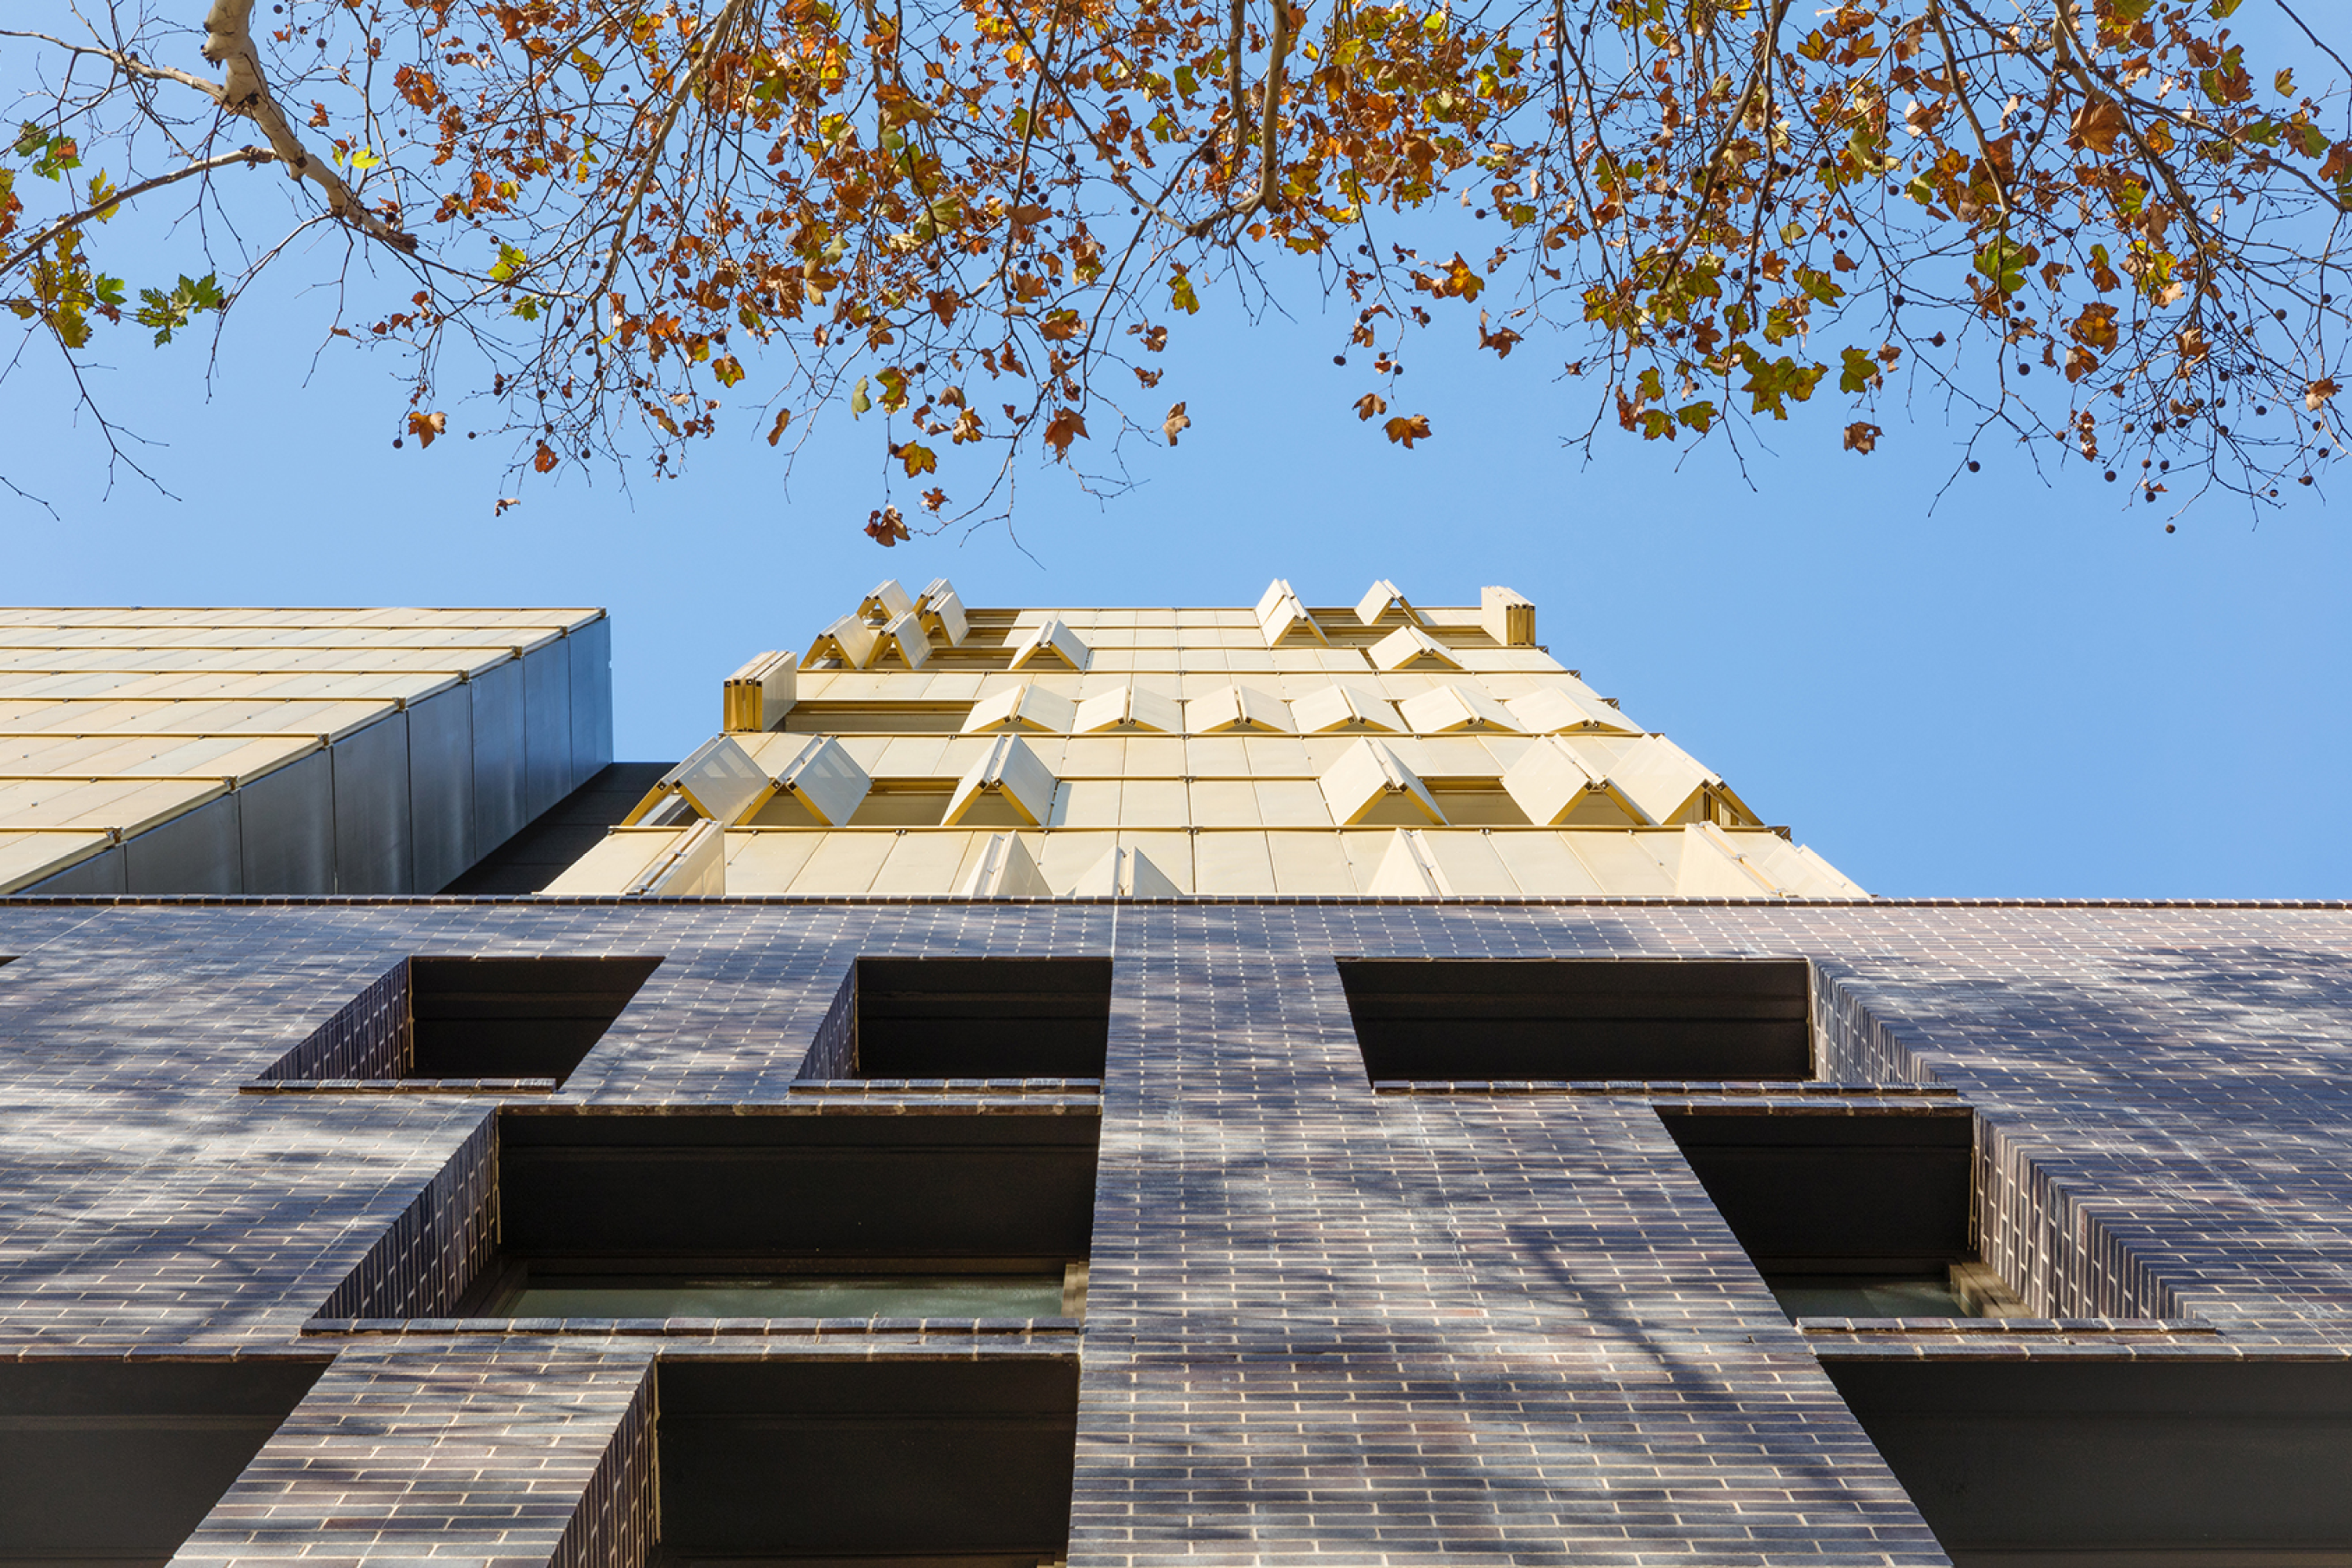 Photograph of the award-wining Day Street Apartments external façade designed by Tzannes